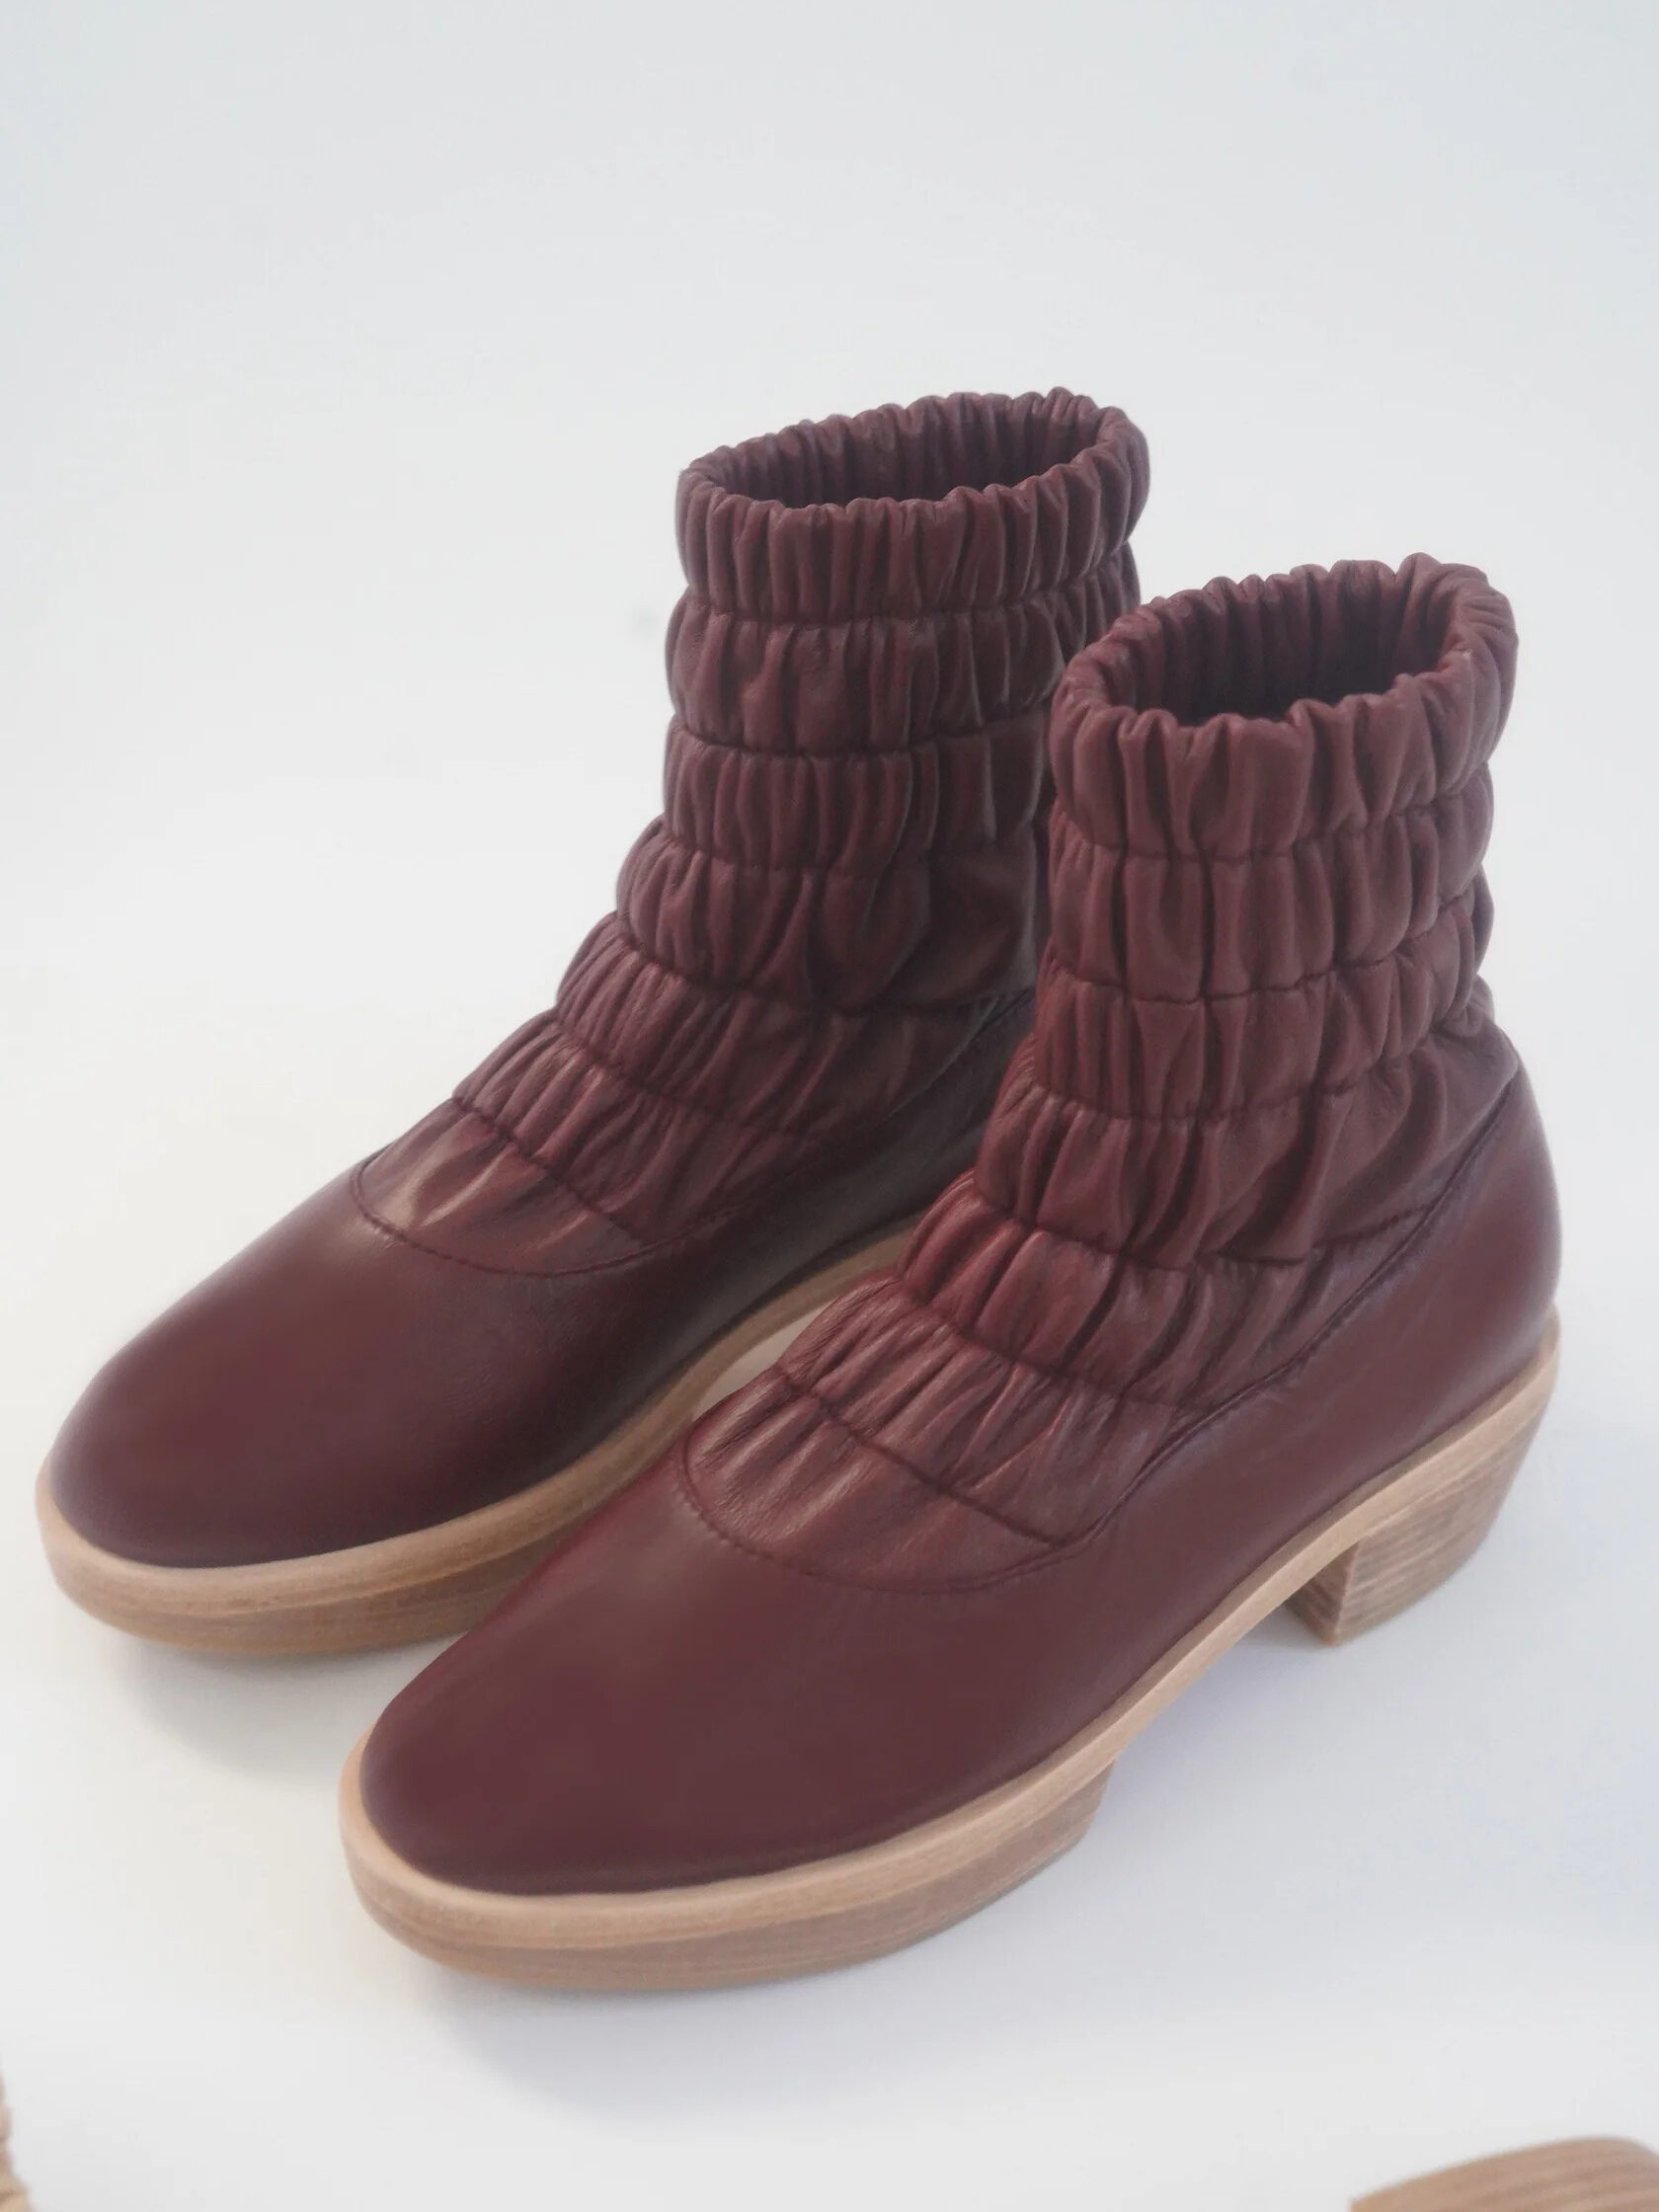 Beklina wine-colored sustainable winter clog boots.